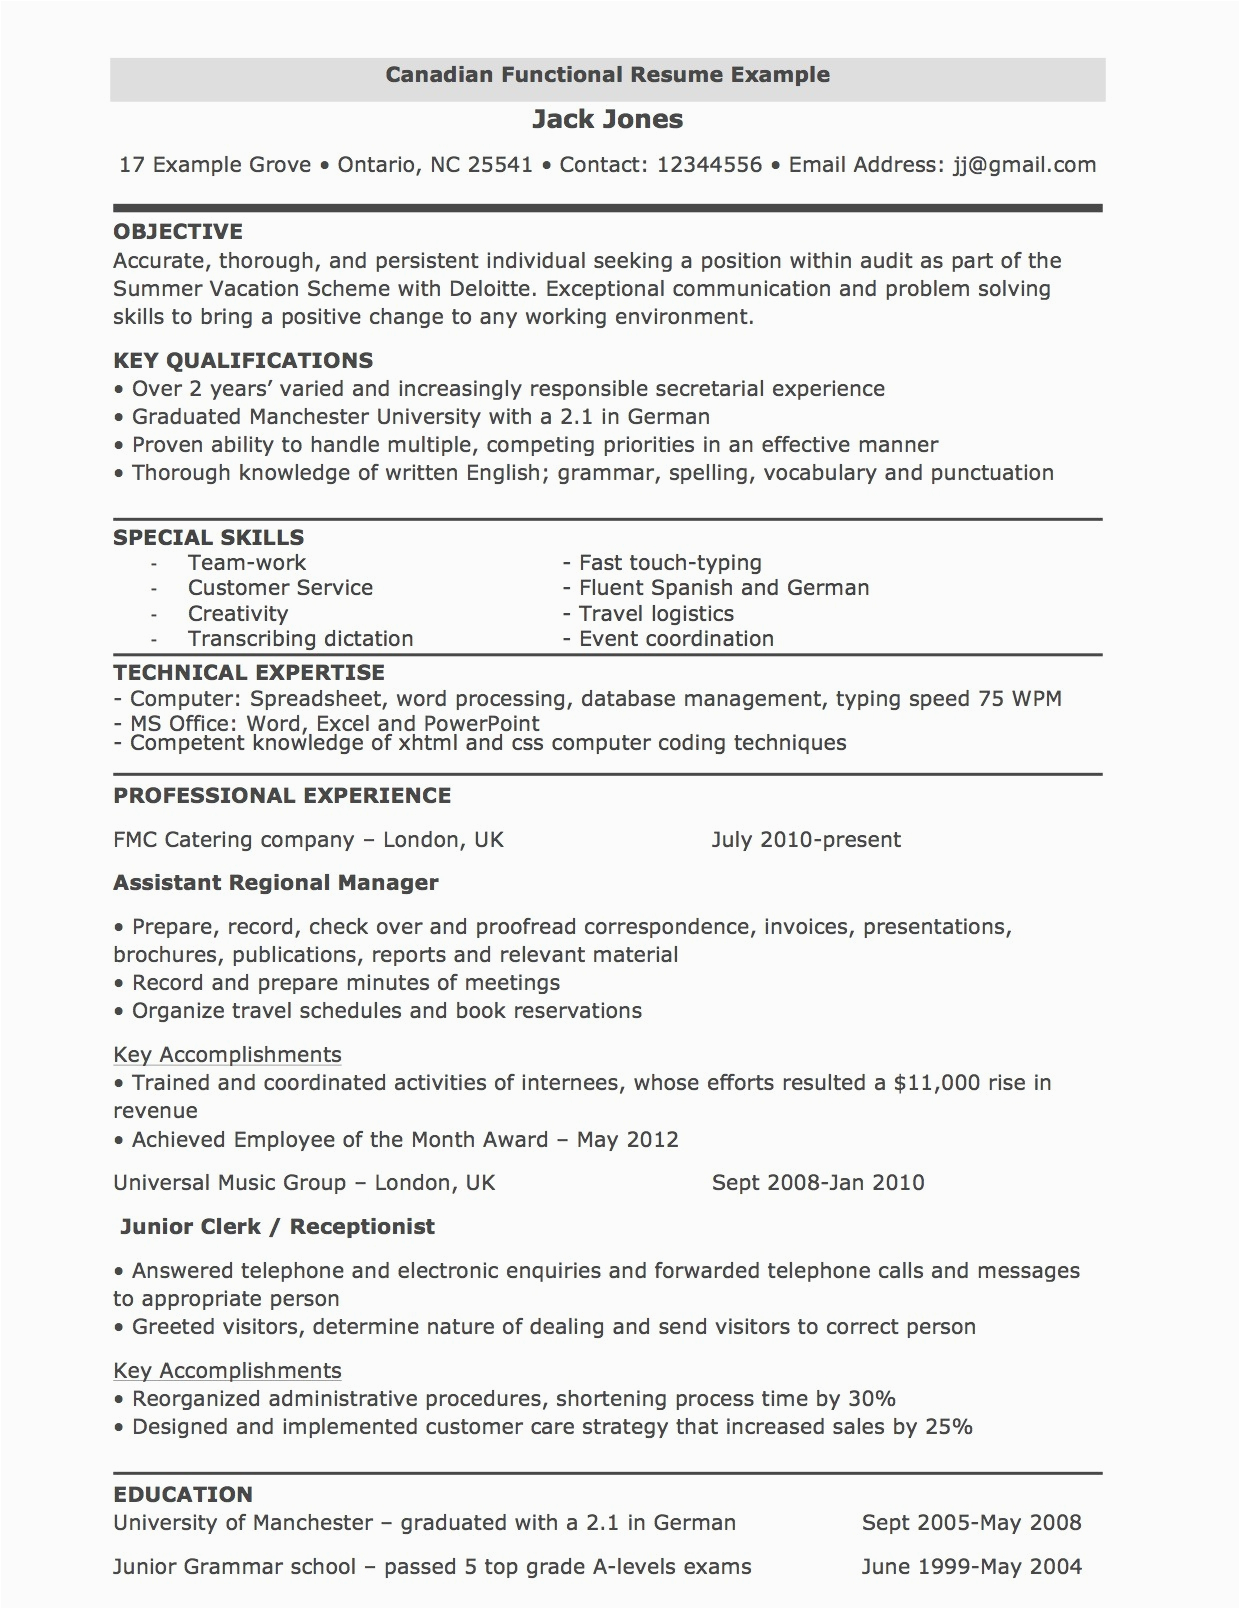 Sample Resume for Canada Post Job Functional Resume for Canada